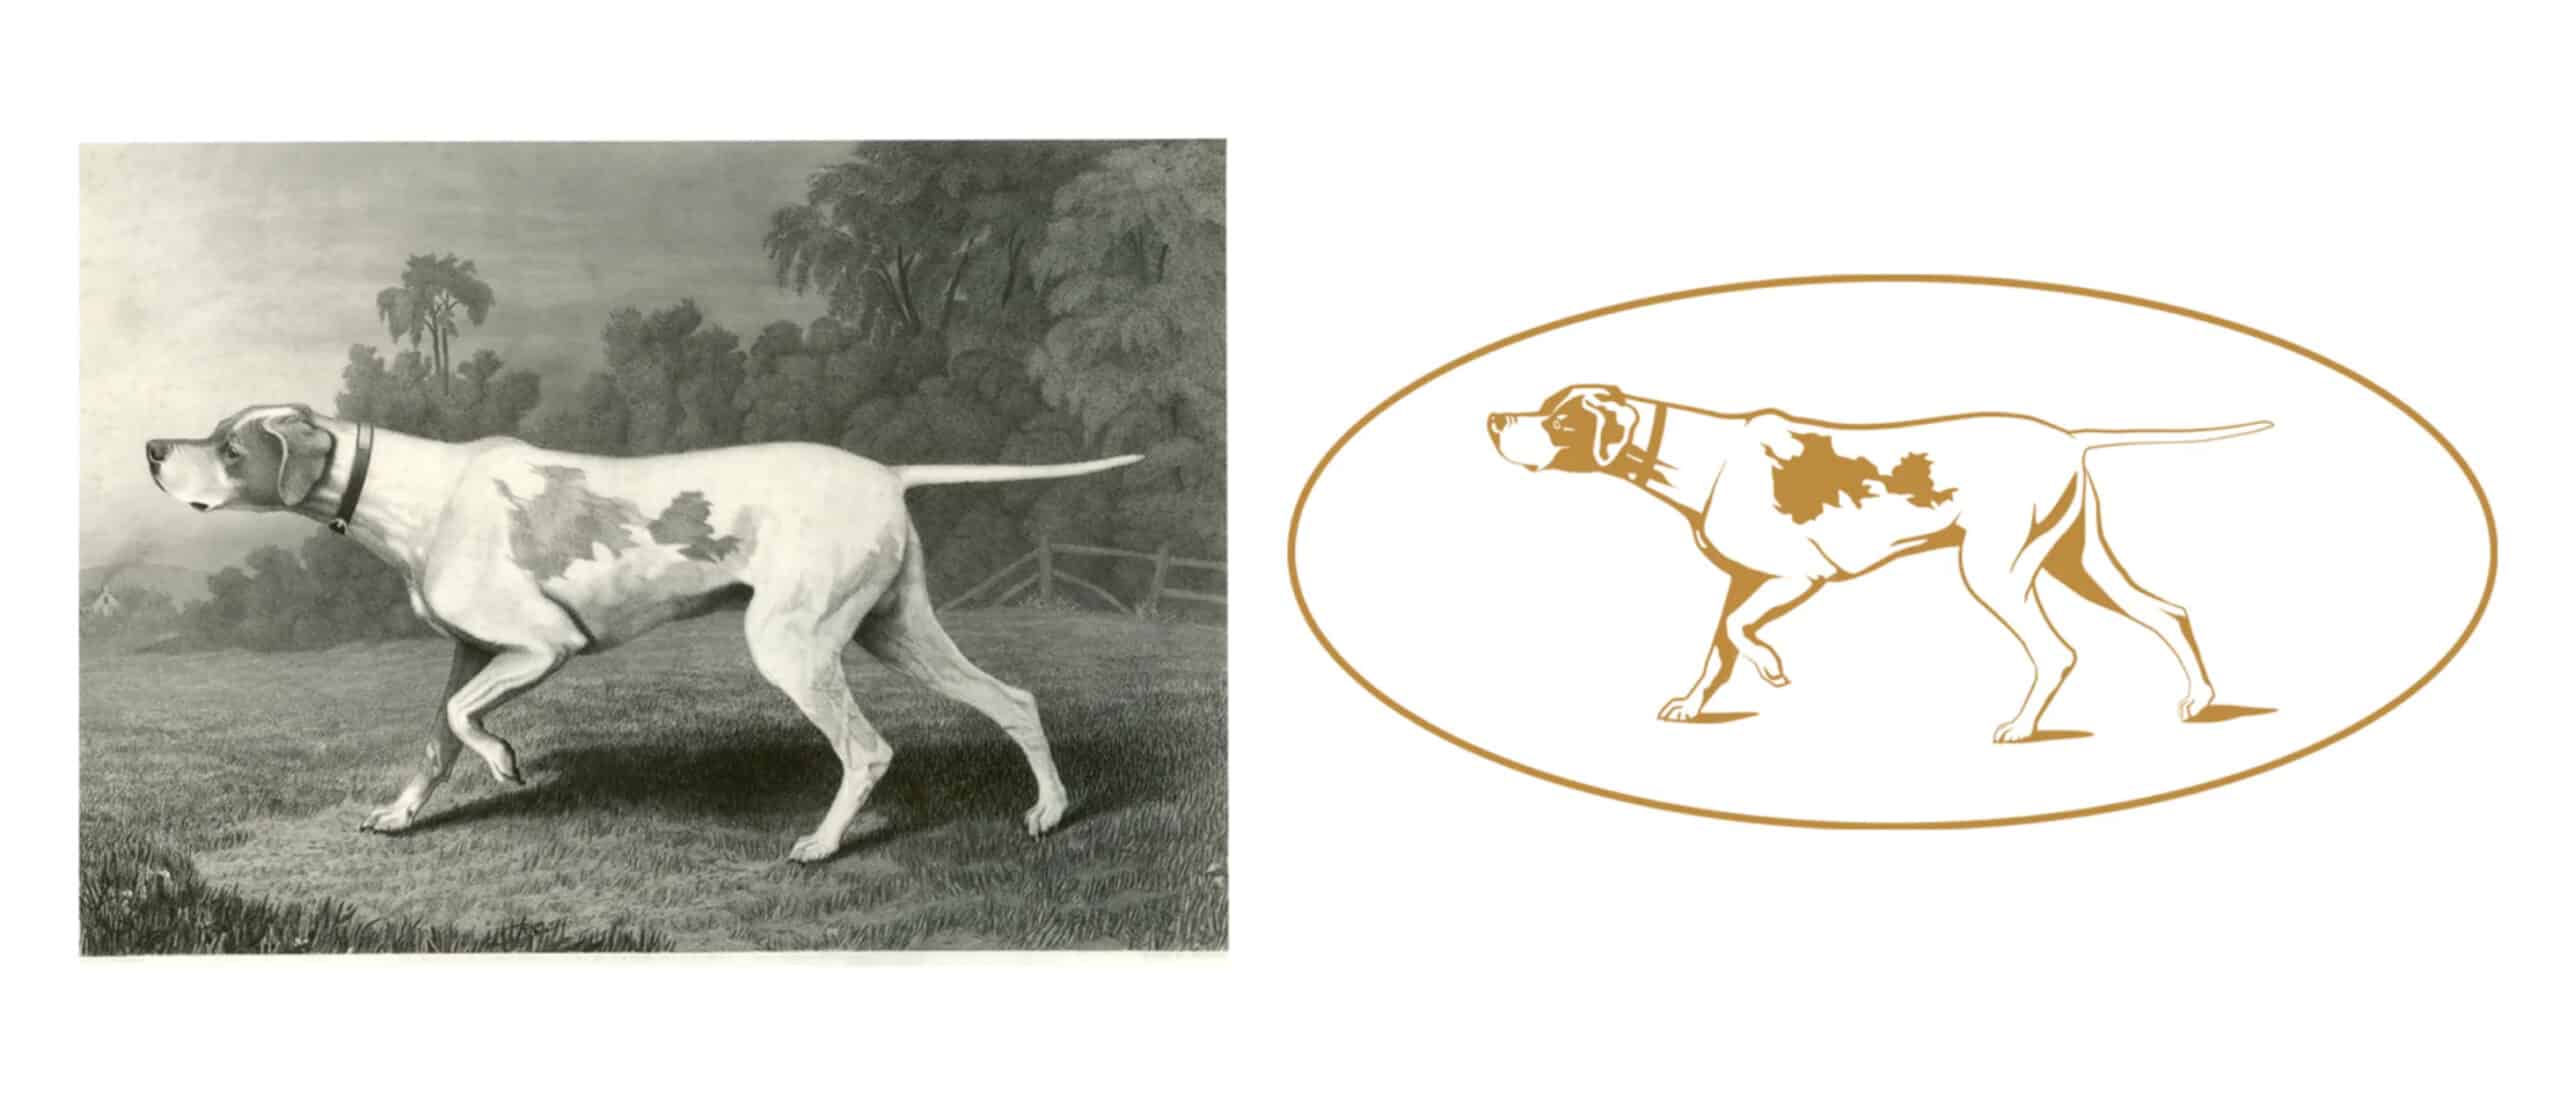 A black and white drawing of a great dane and a black and white drawing of a great dane.